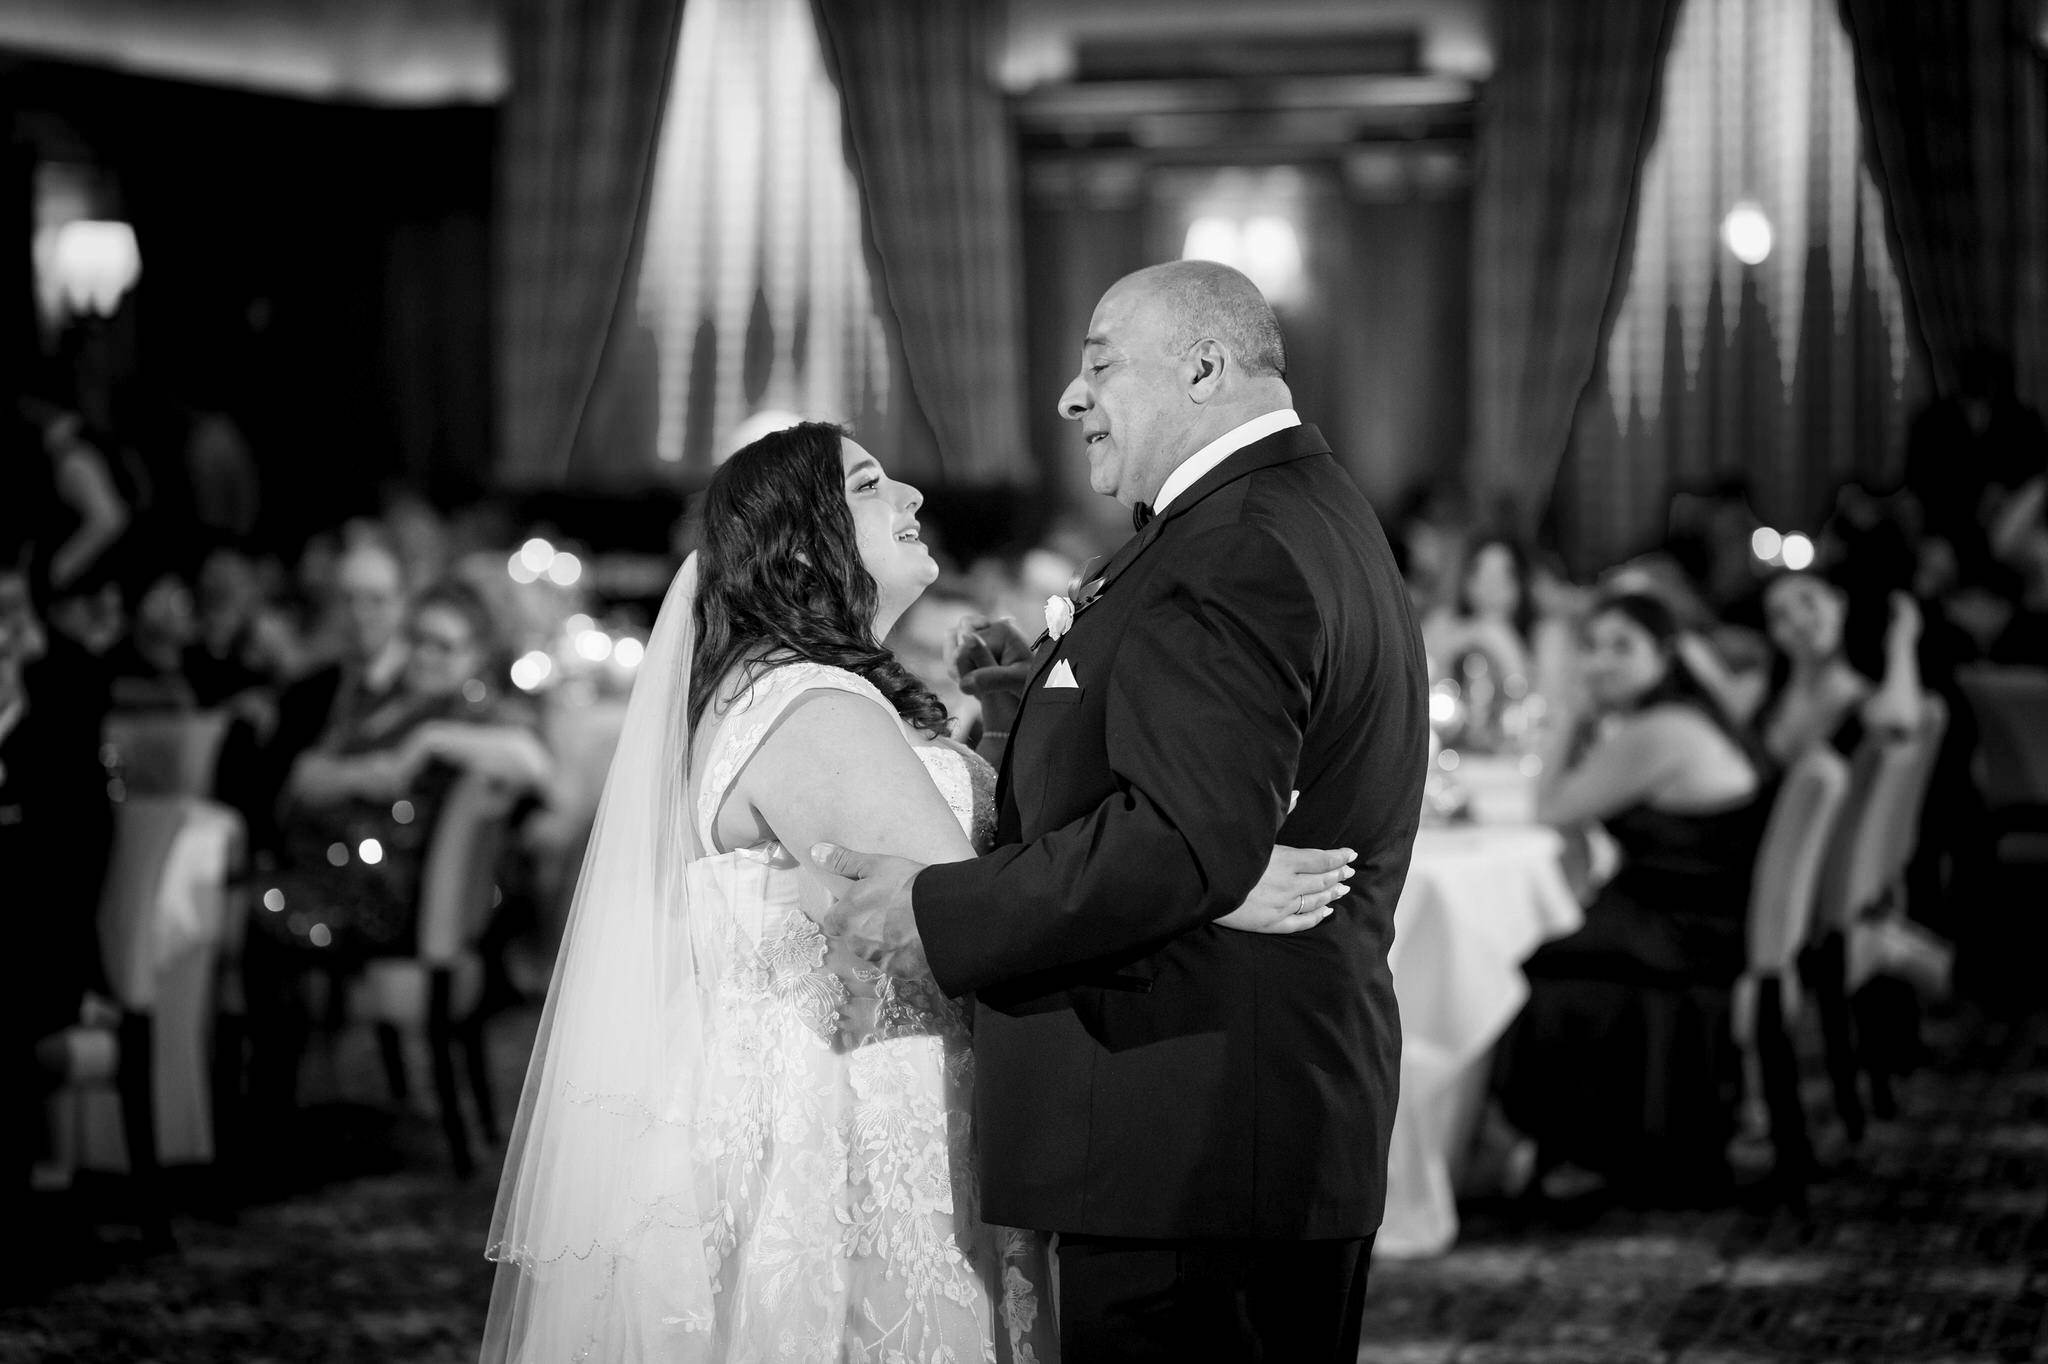 The father of the bride sings to his daughter during their slow dance at a Detroit Athletic Club wedding.